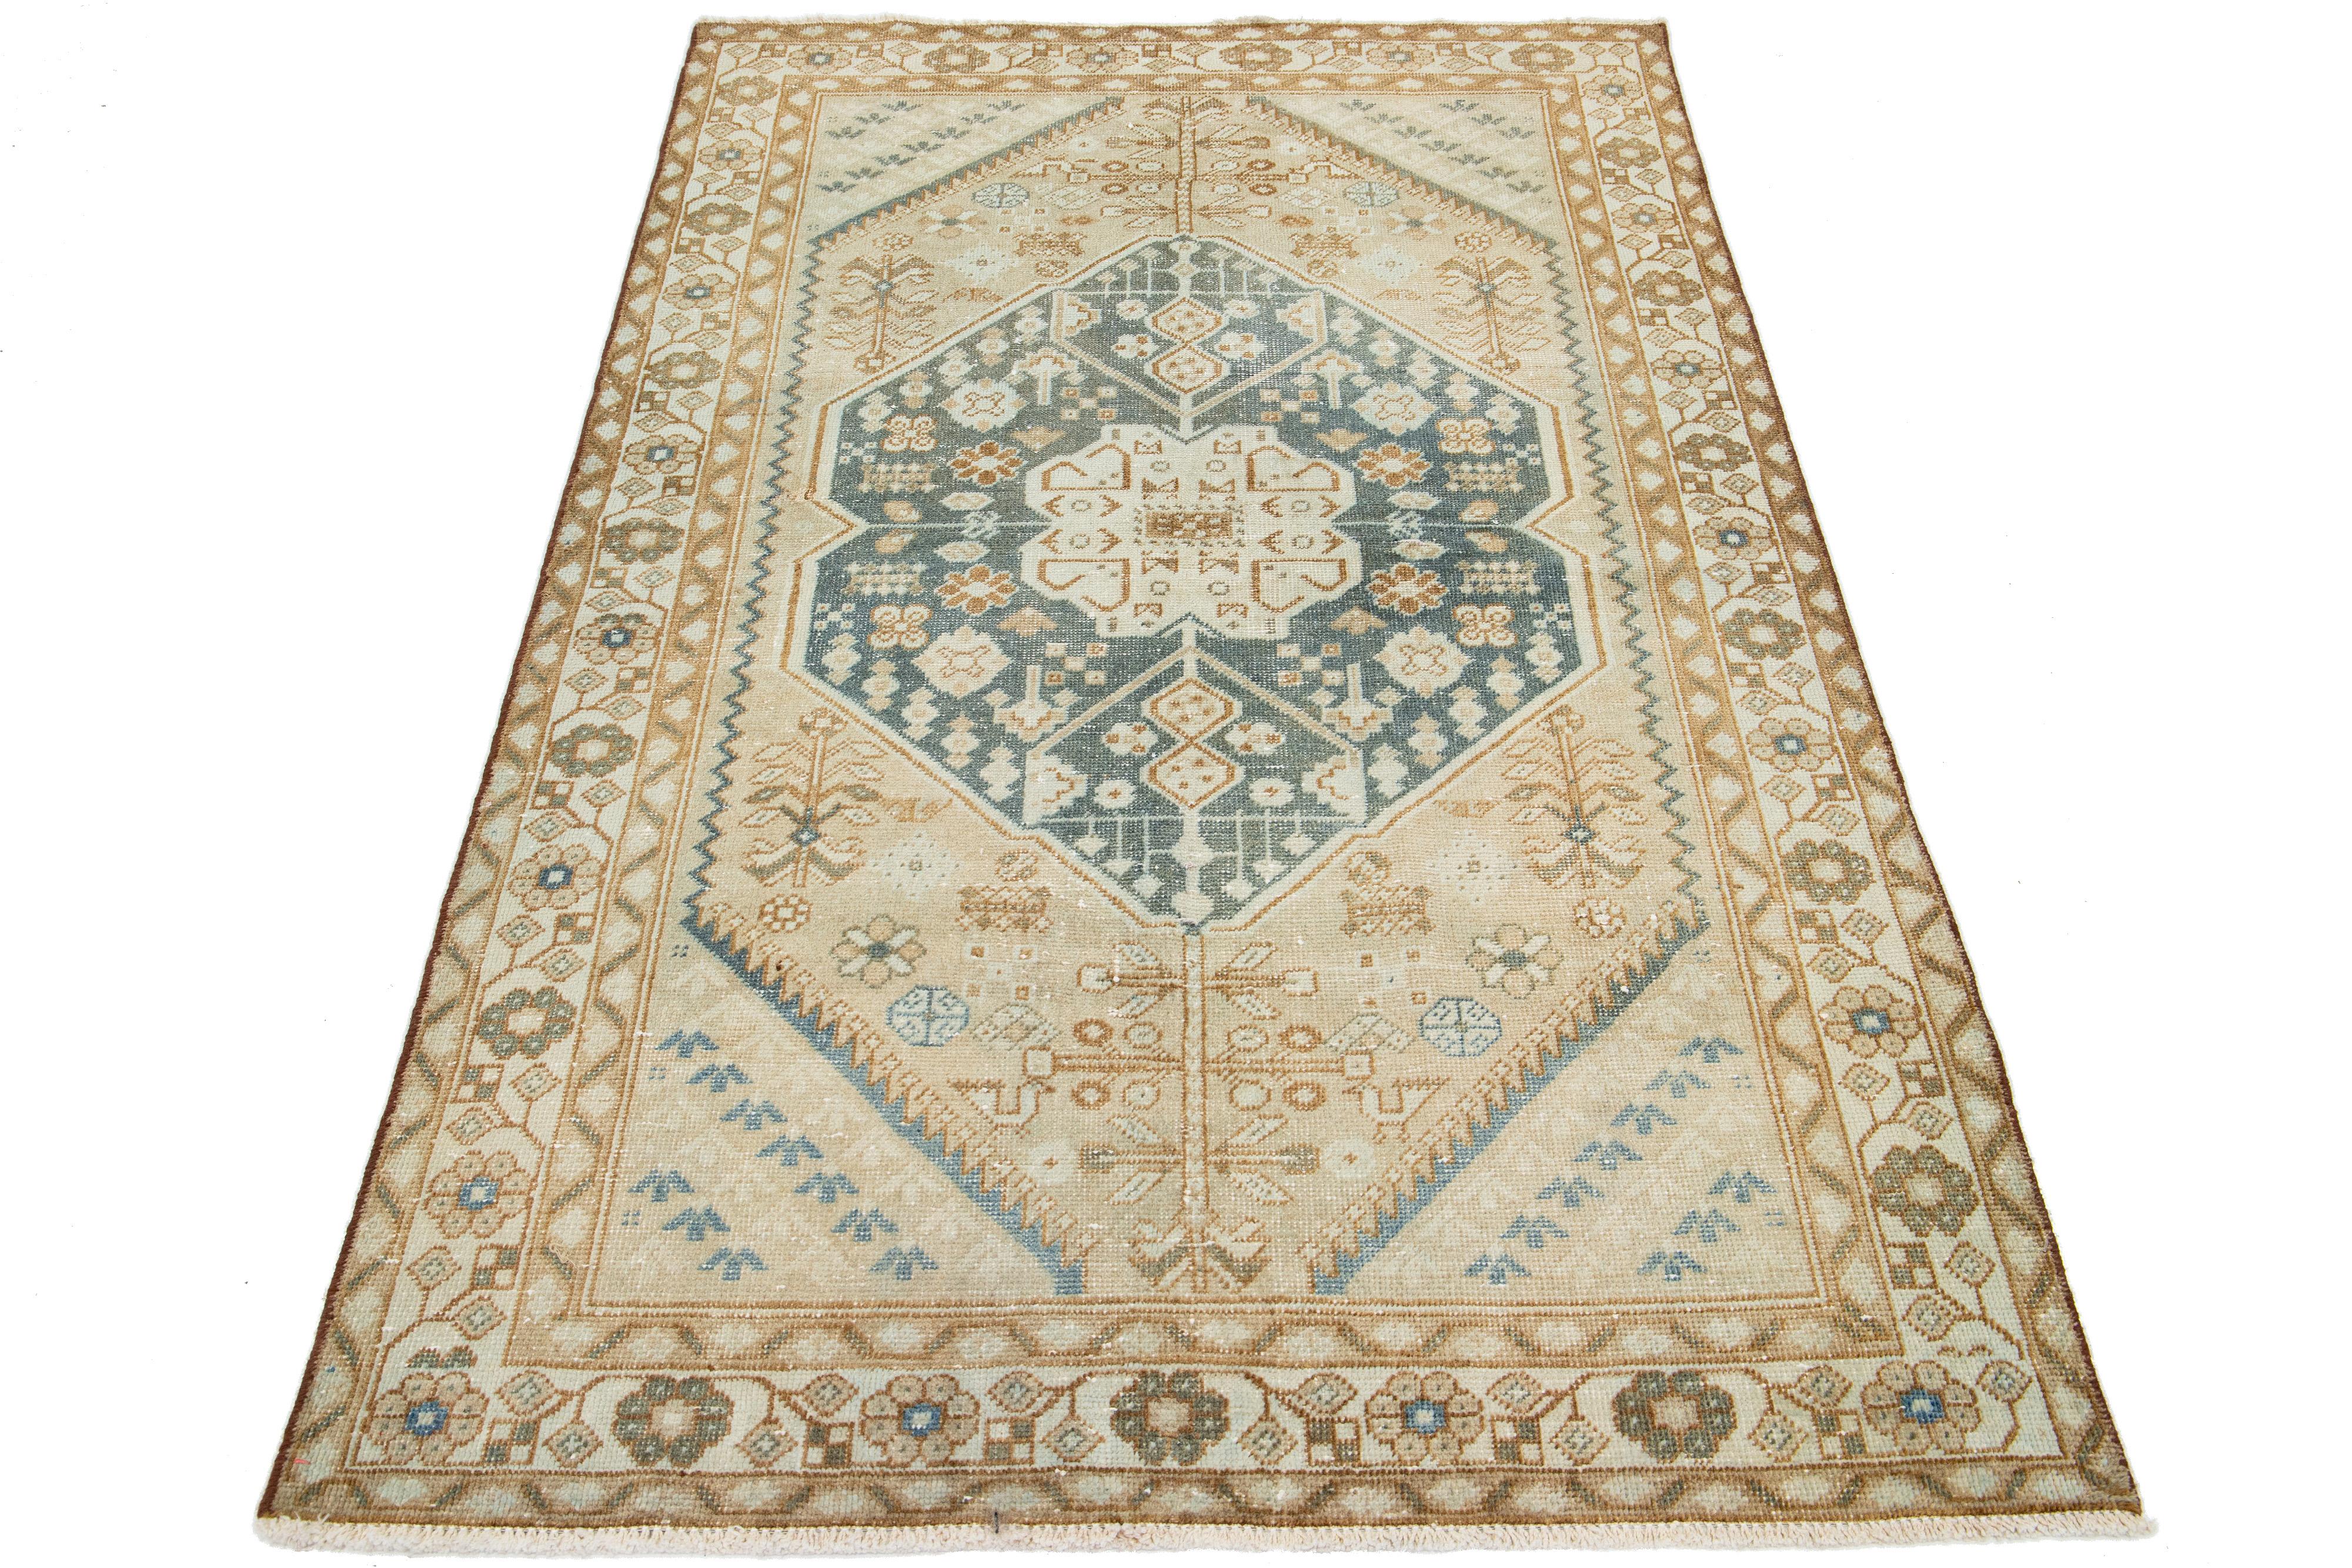 This wool rug showcases a tribal pattern with brown and blue accents on a beige background inspired by Persian Shiraz designs.

This rug measures 4'2